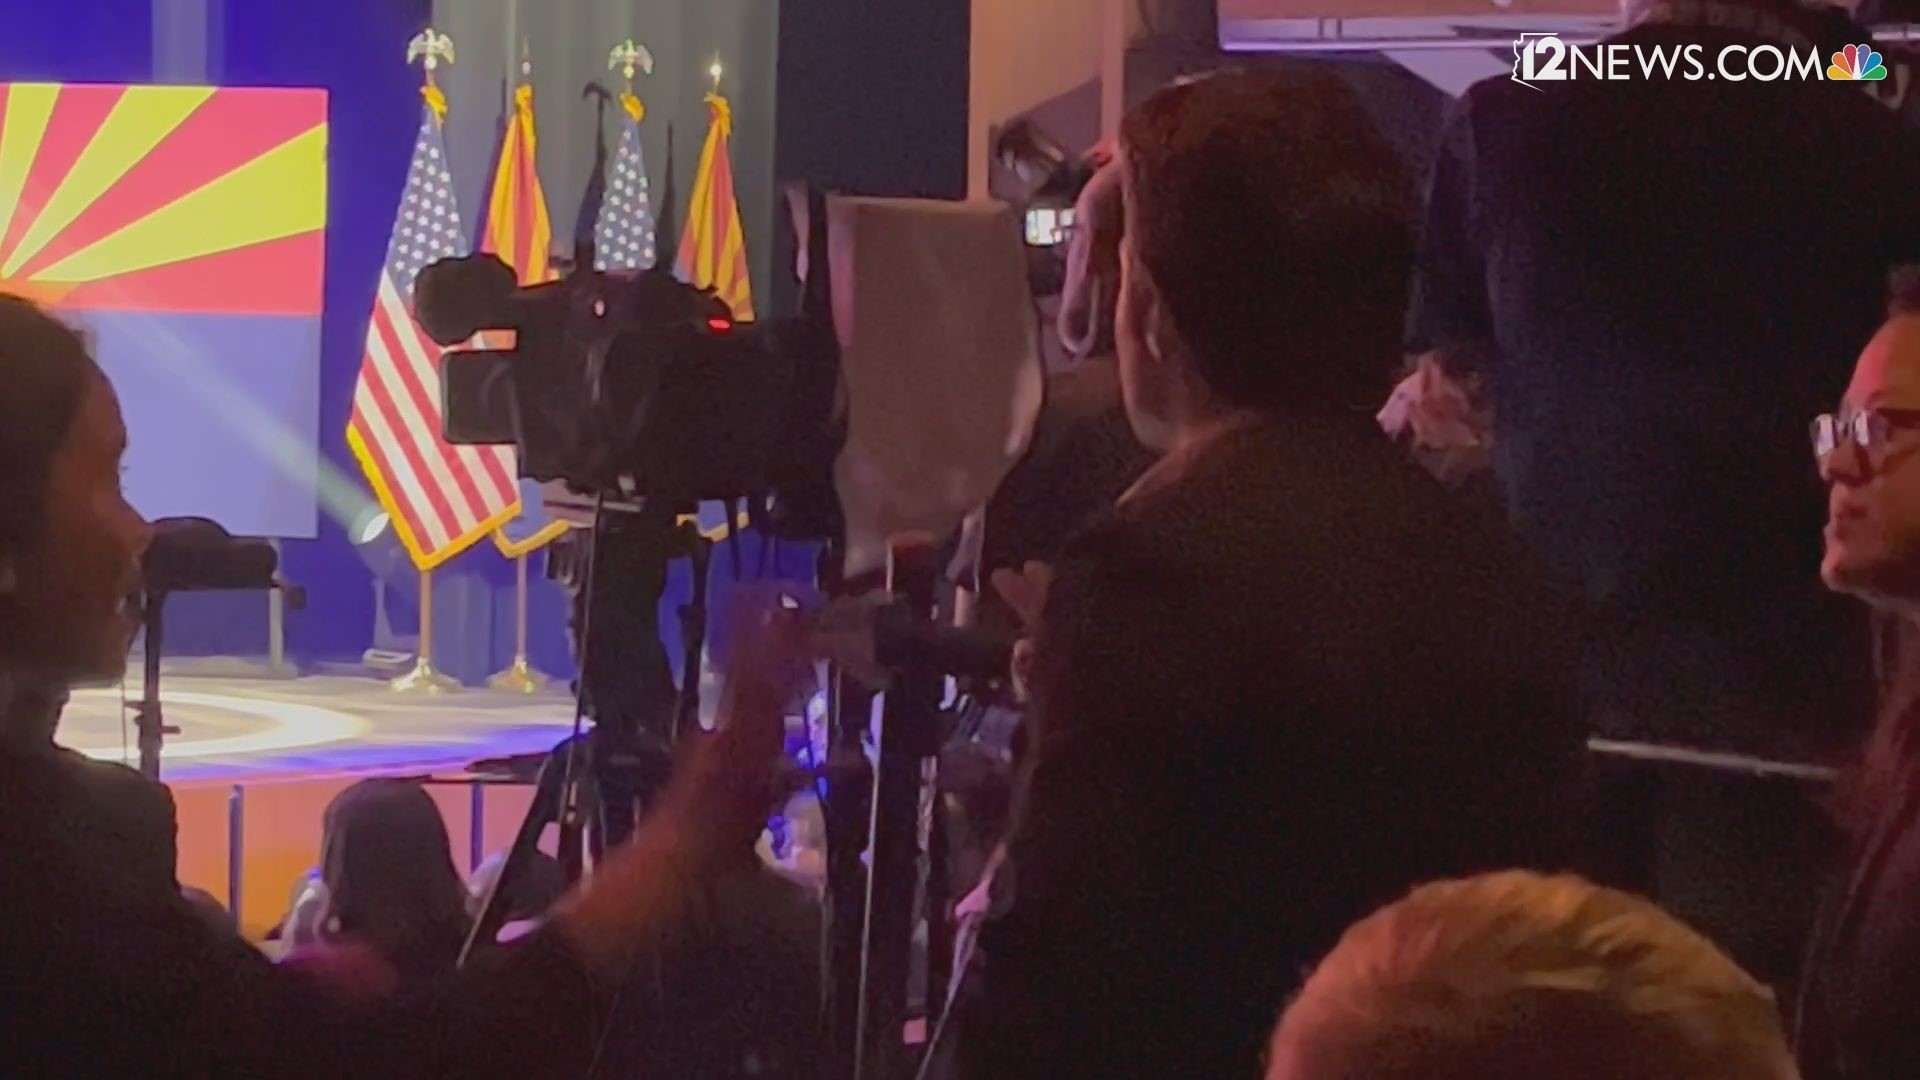 Video shows security escorting a man out of a Tempe event featuring President Joe Biden.